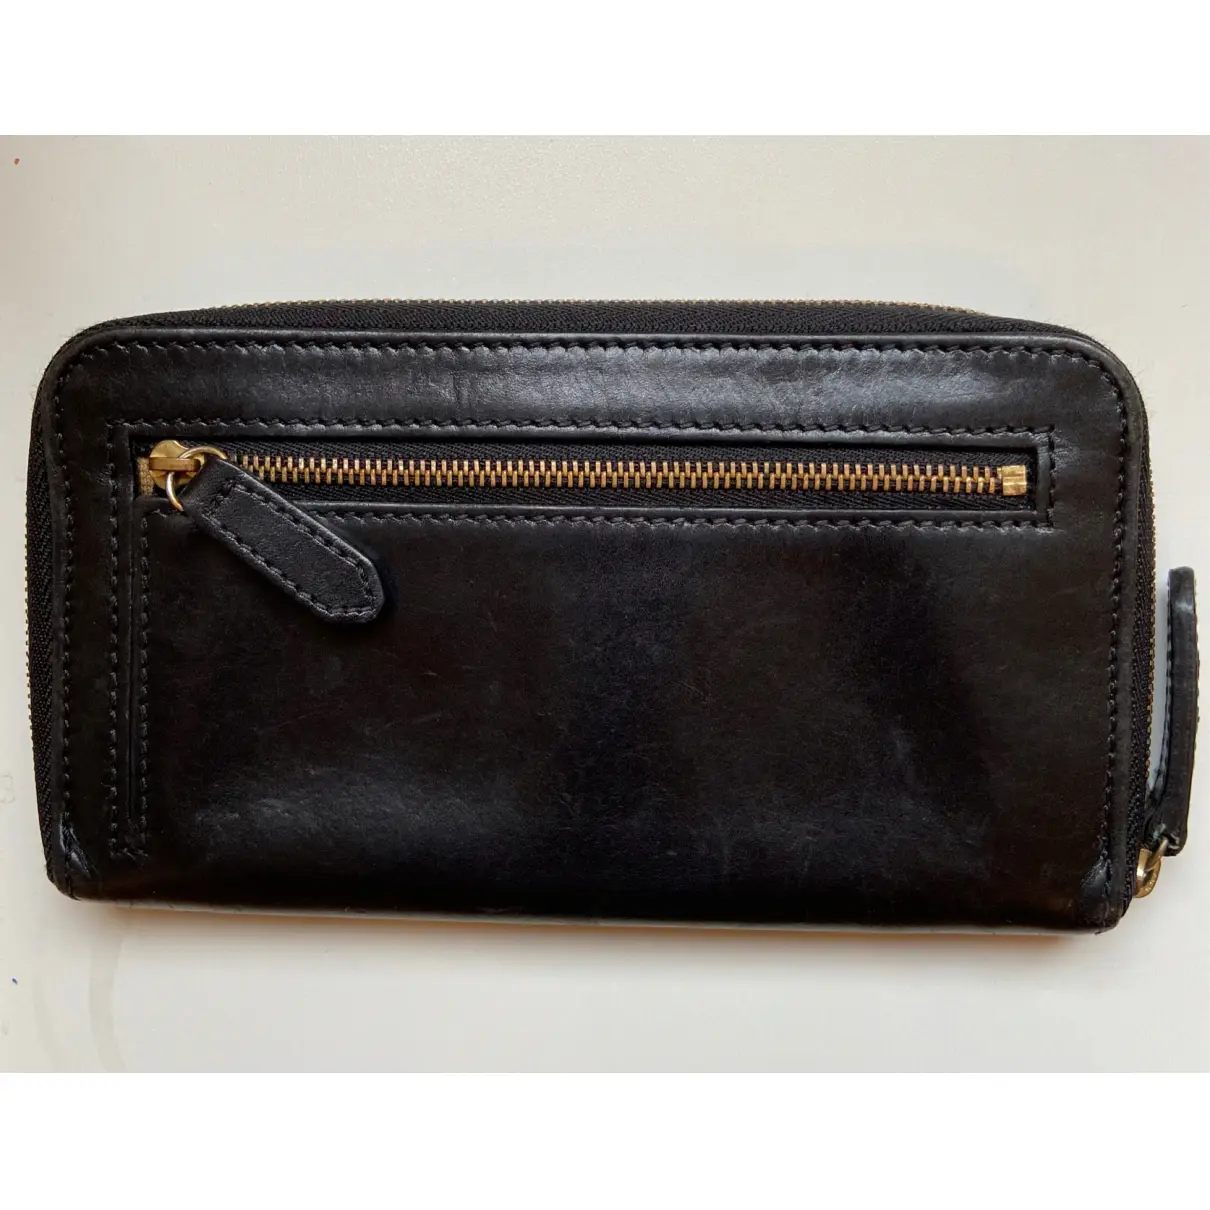 Buy Burberry Leather purse online